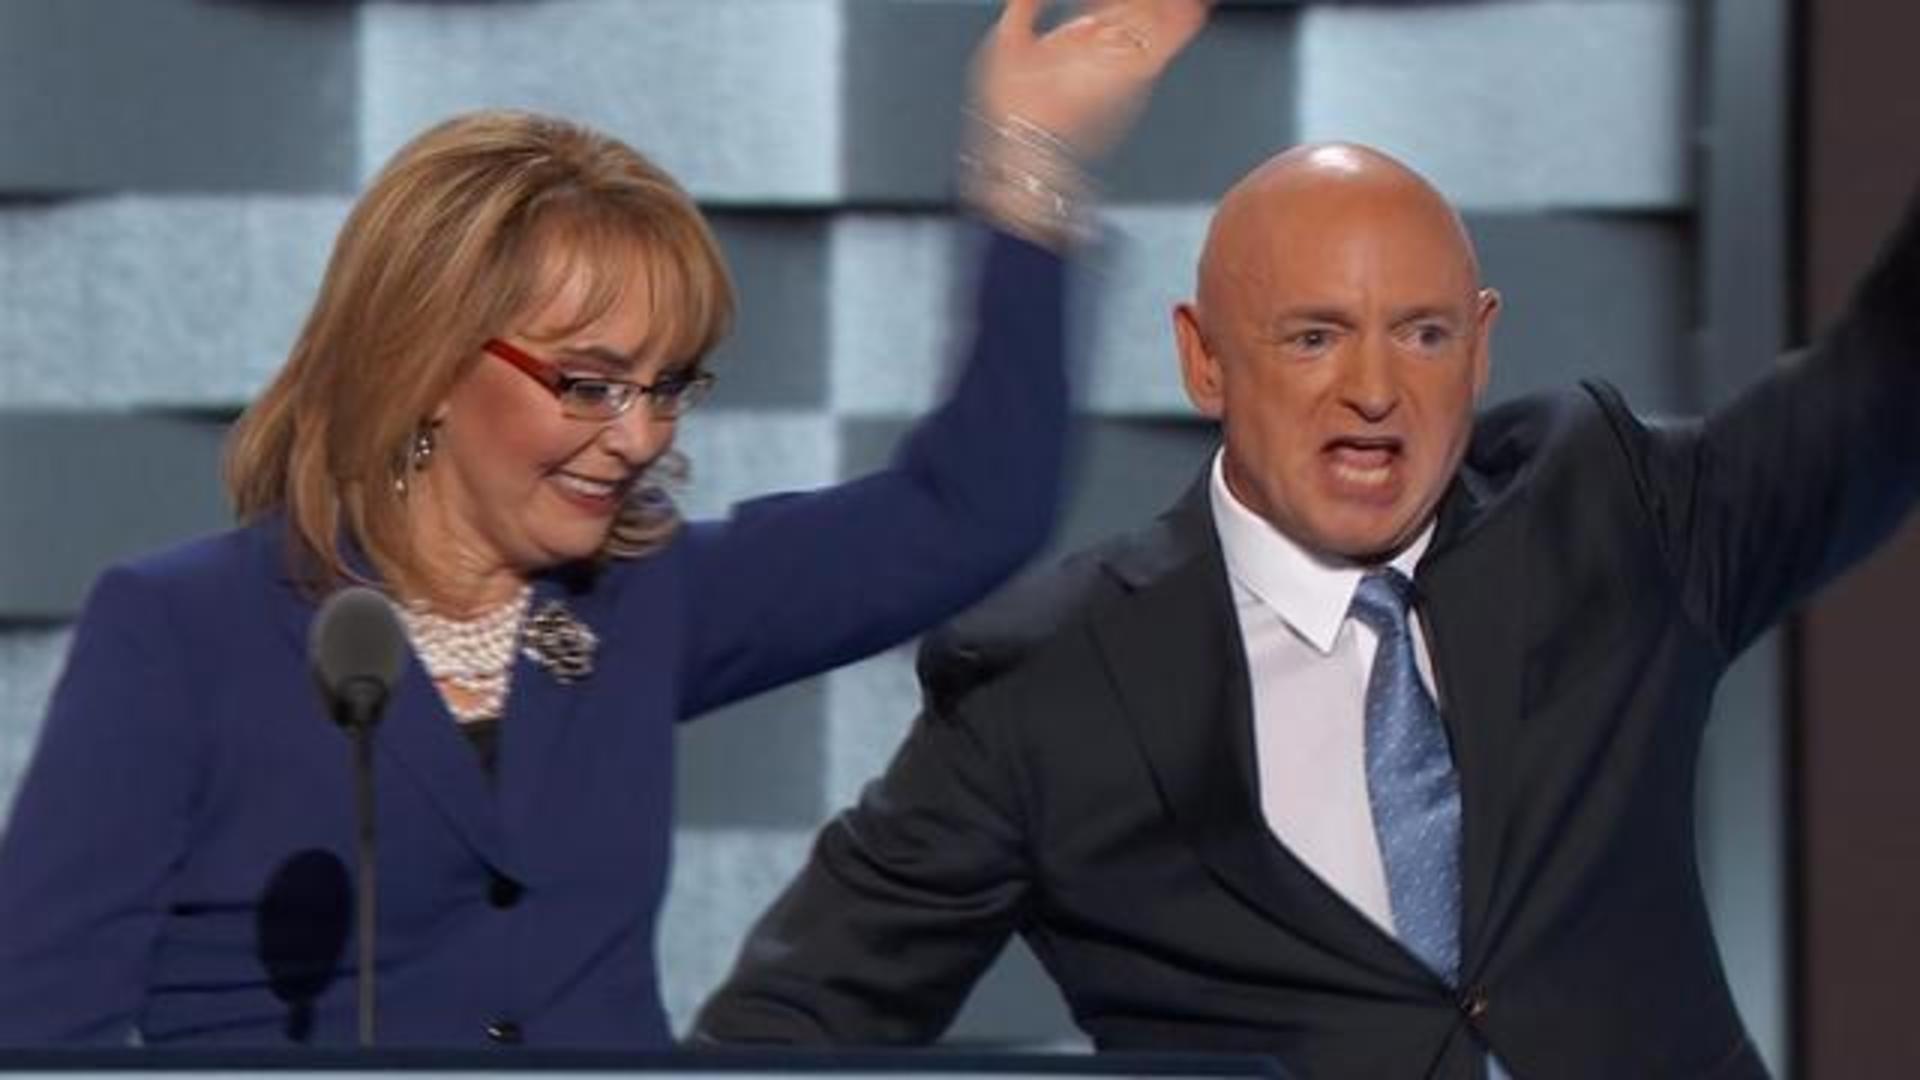 A Timeline of Mark Kelly and Gabrielle Giffords' Relationship